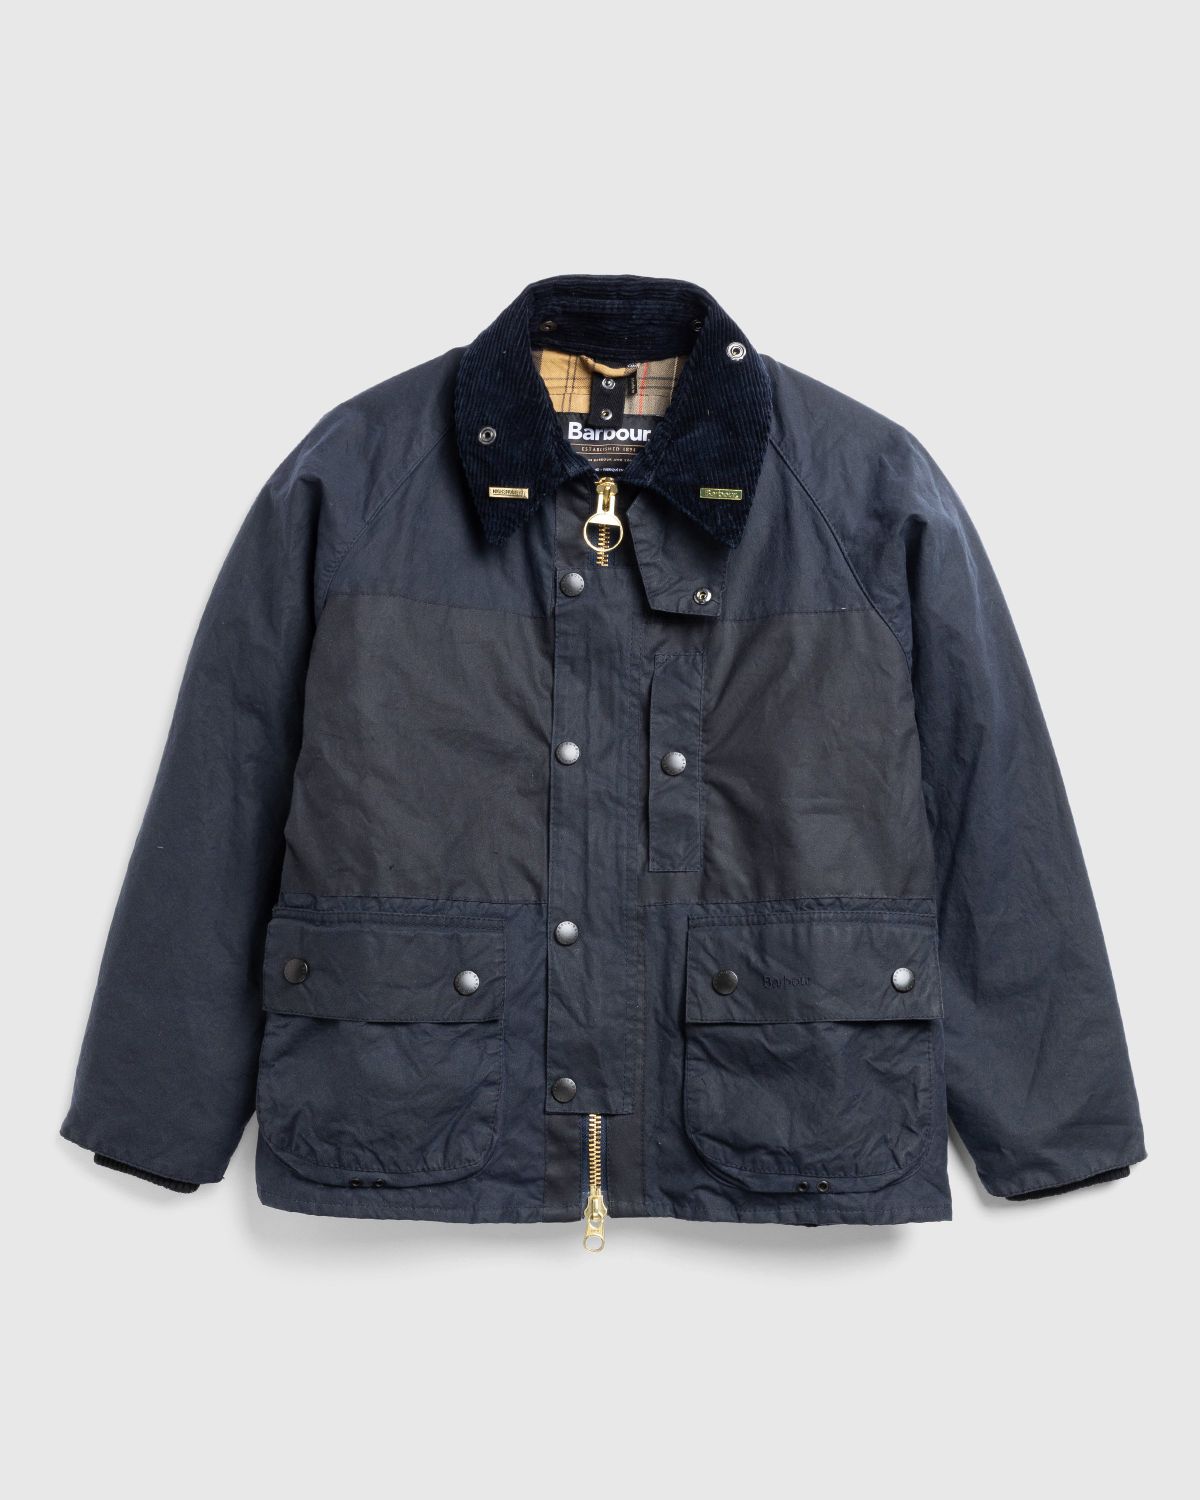 Barbour x Highsnobiety – Re-Loved Bedale Jacket Size 38 (M) Navy